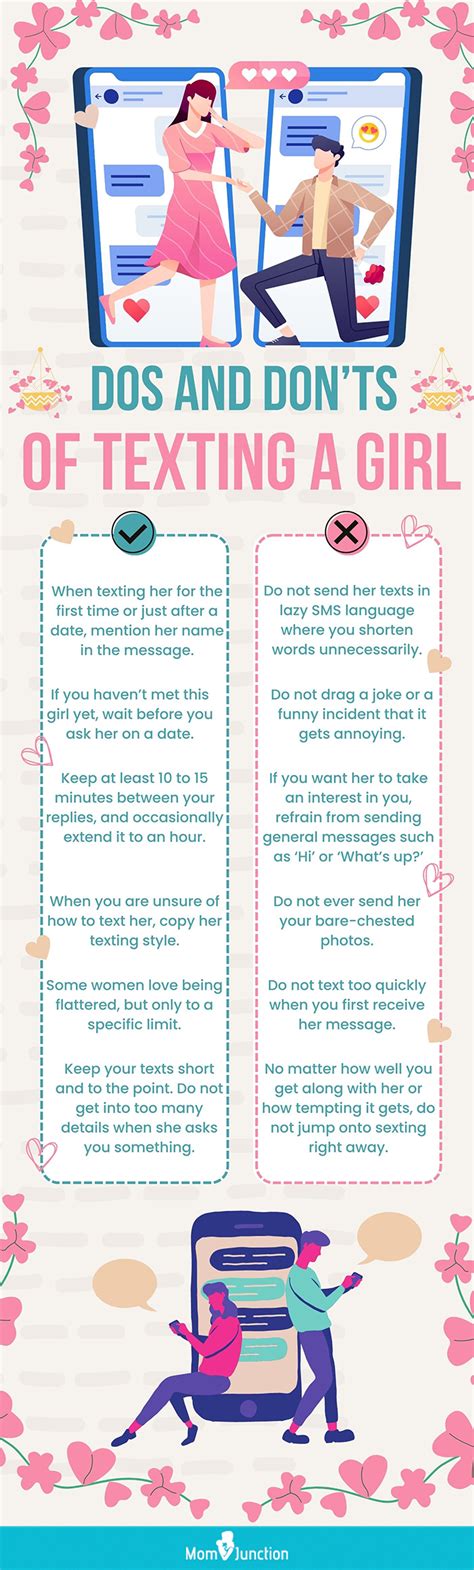 how often should you text a girl after getting her number